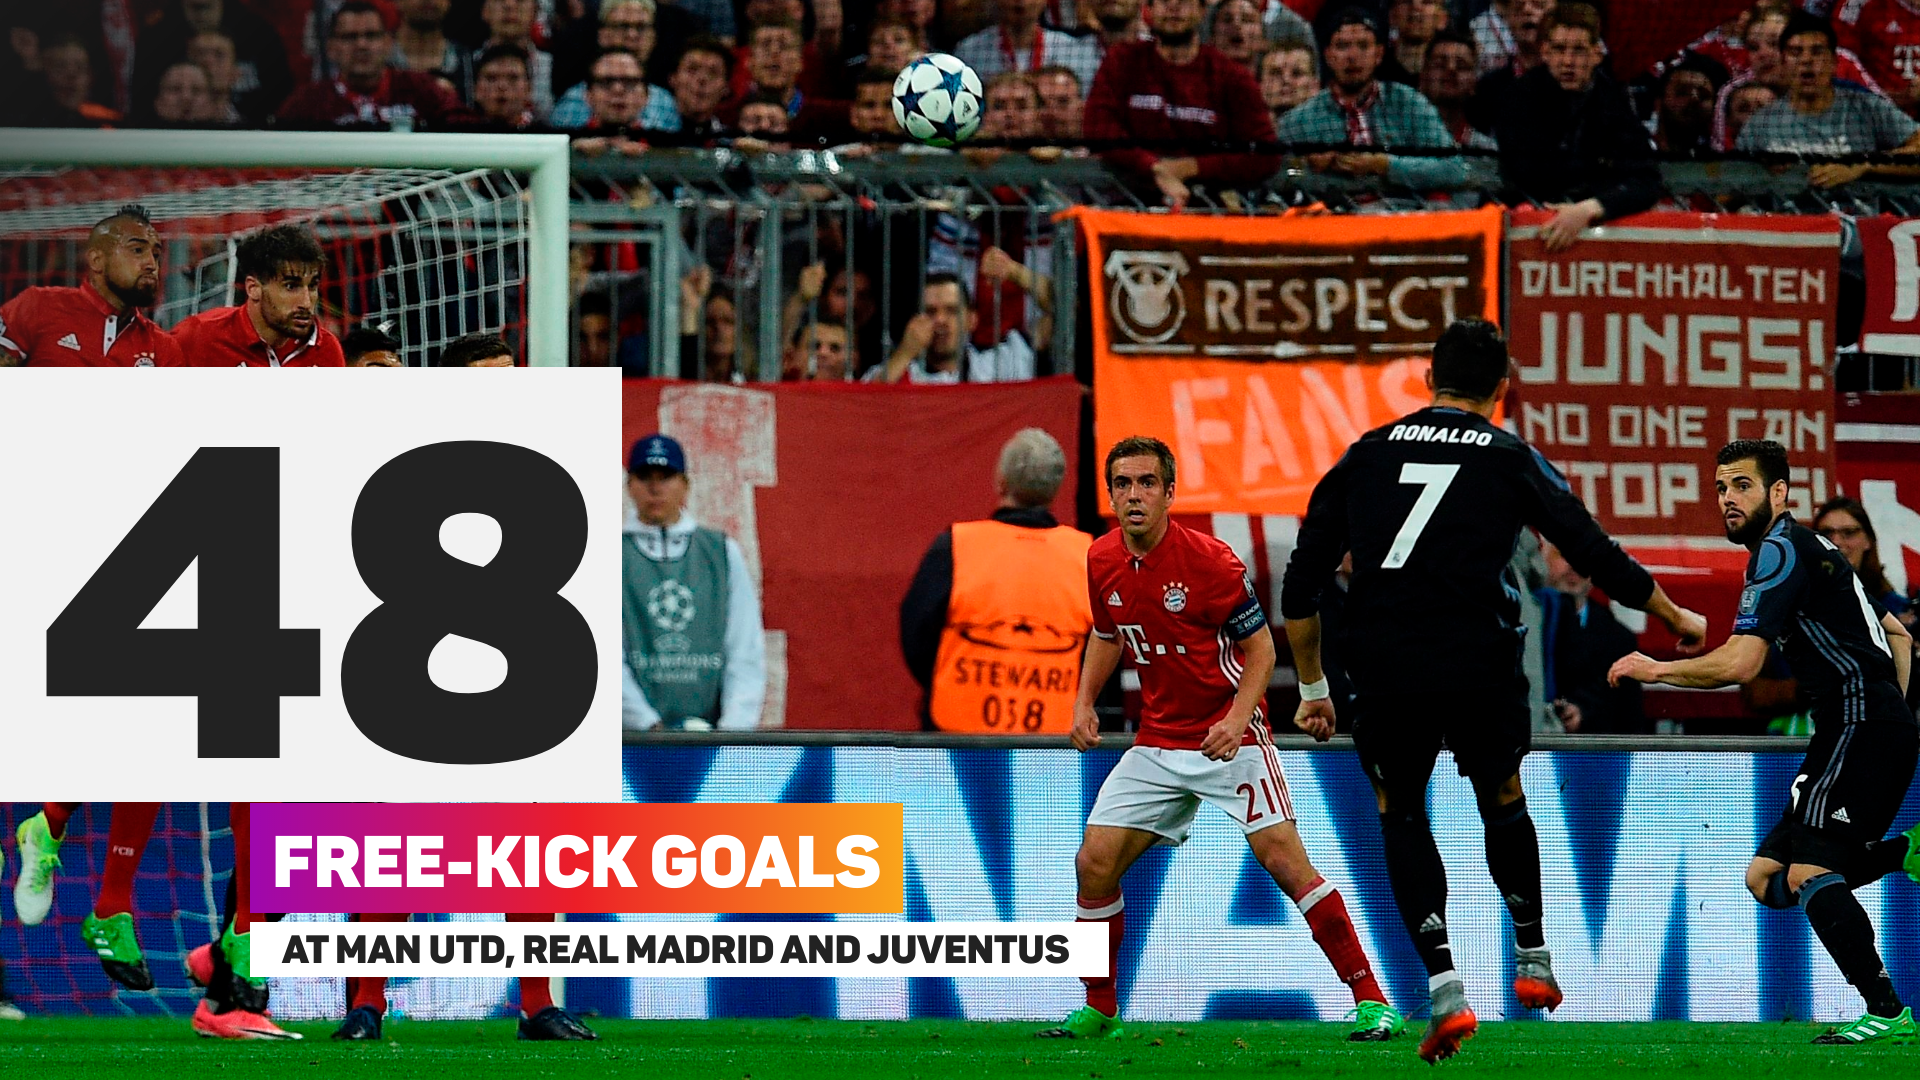 Cristiano Ronaldo scored 48 goals across his time at Manchester United, Real Madrid and Juventus